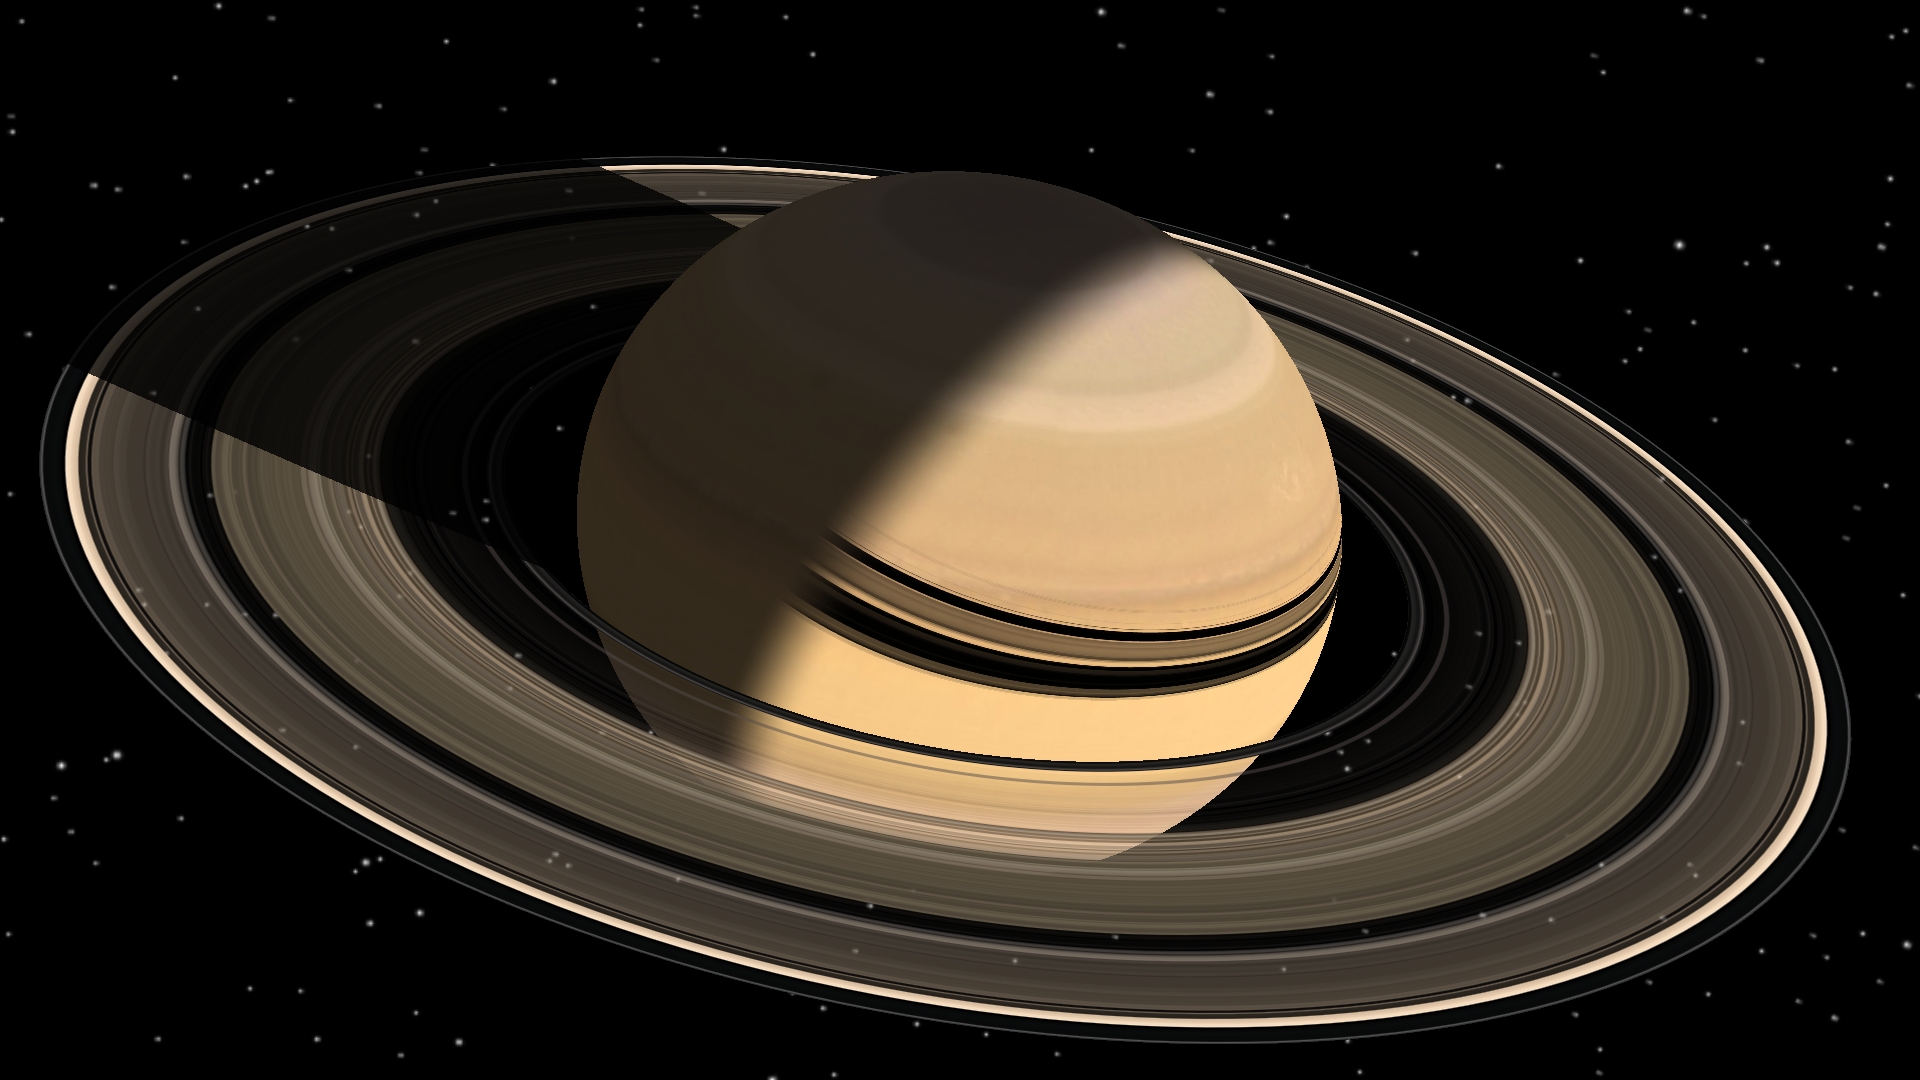 Visualization of Saturn, rings and moons using OpenGL Shaders